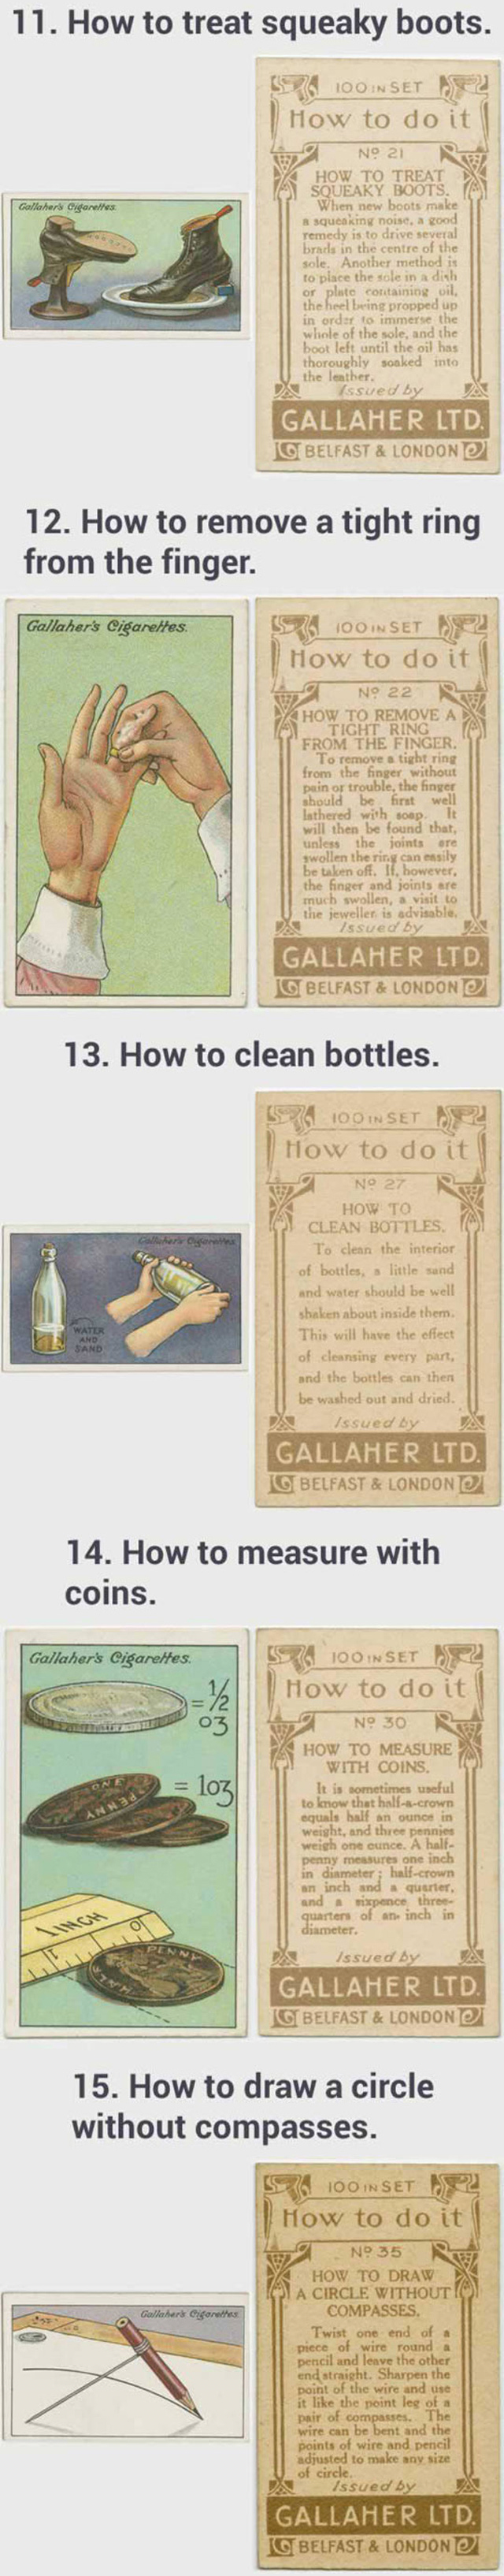 Cool Vintage Life Hacks That Are Still Useful Today